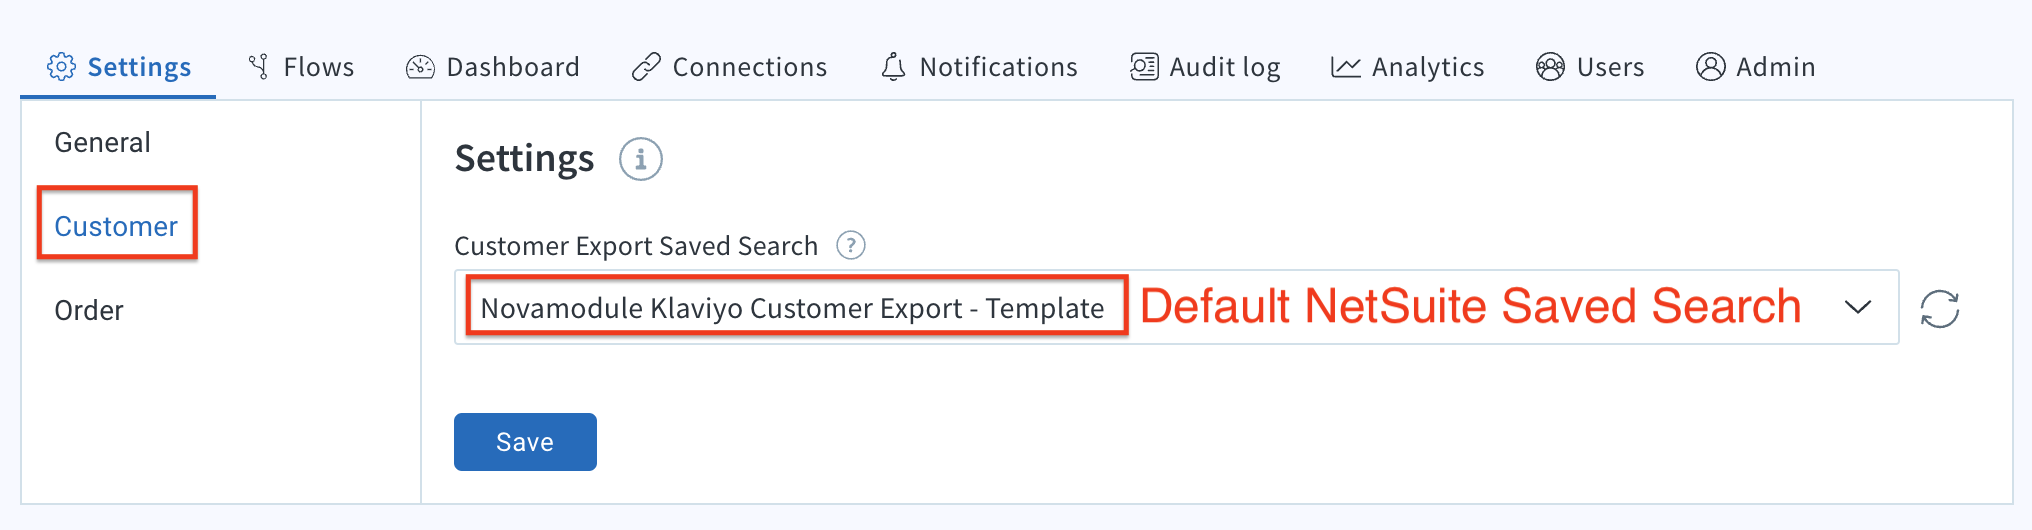 Configure_NetSuite_Customer_Export_Saved_Search.png